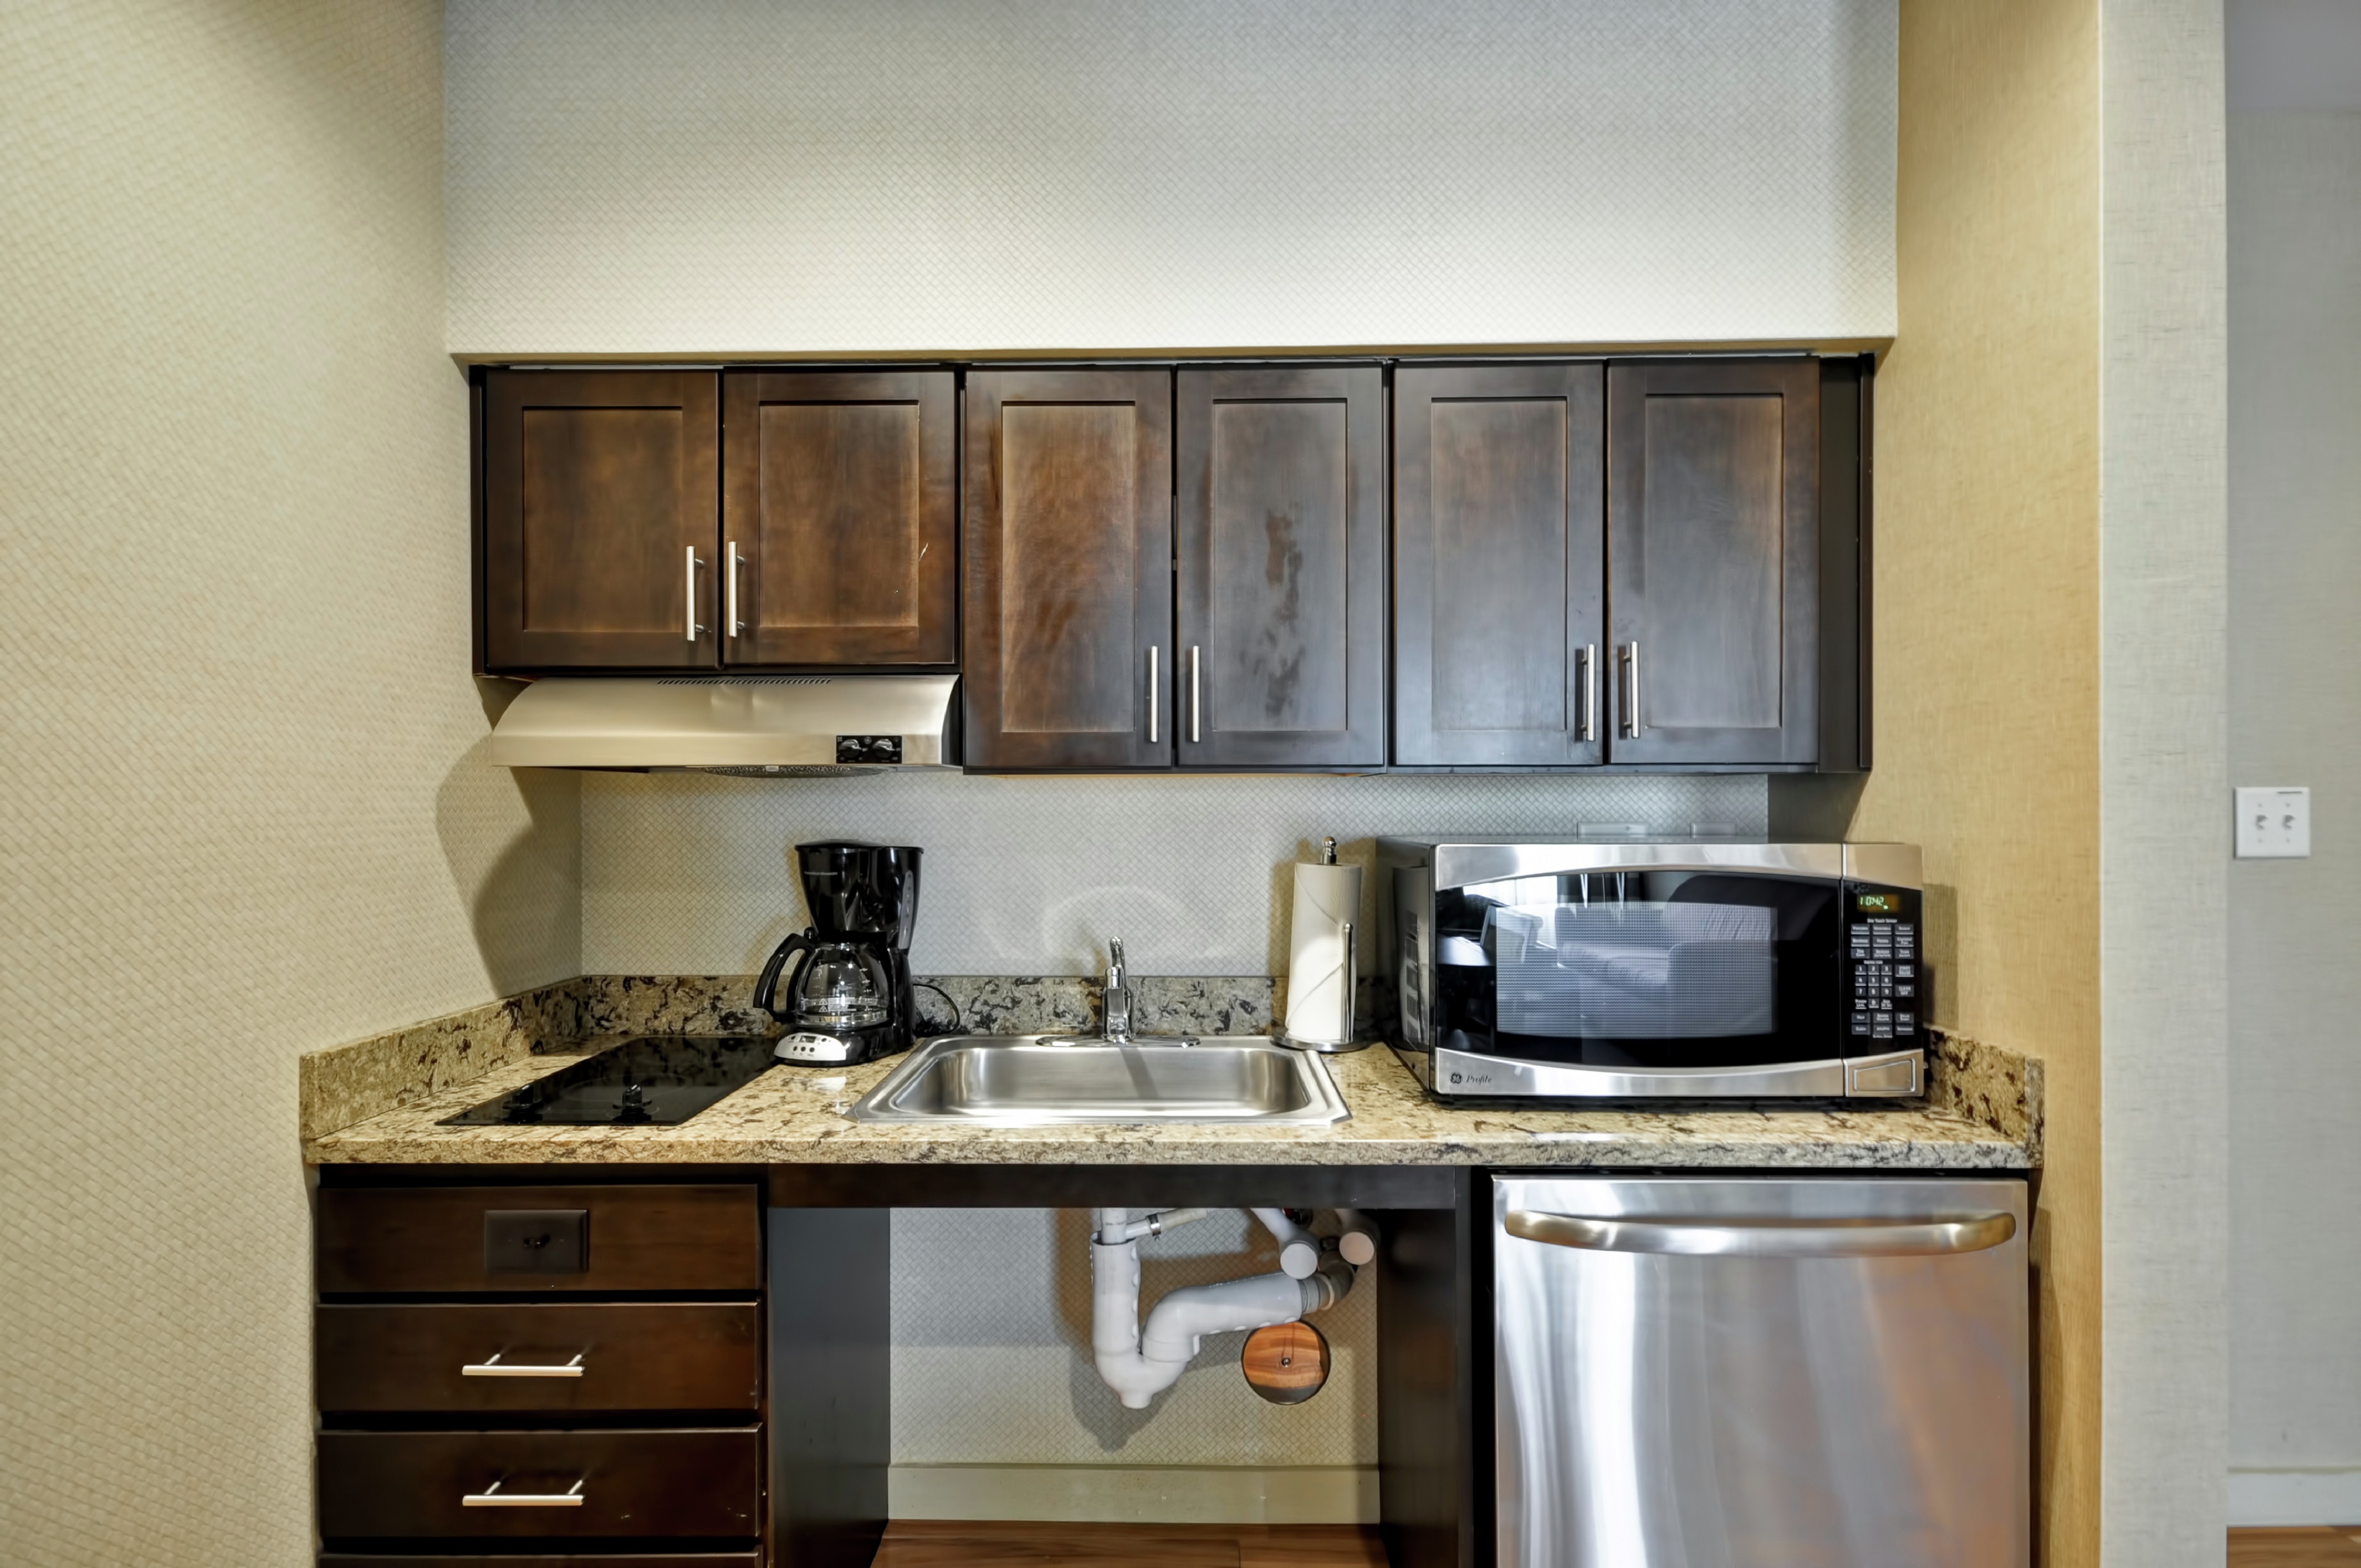 Suite Kitchen with Room Technology